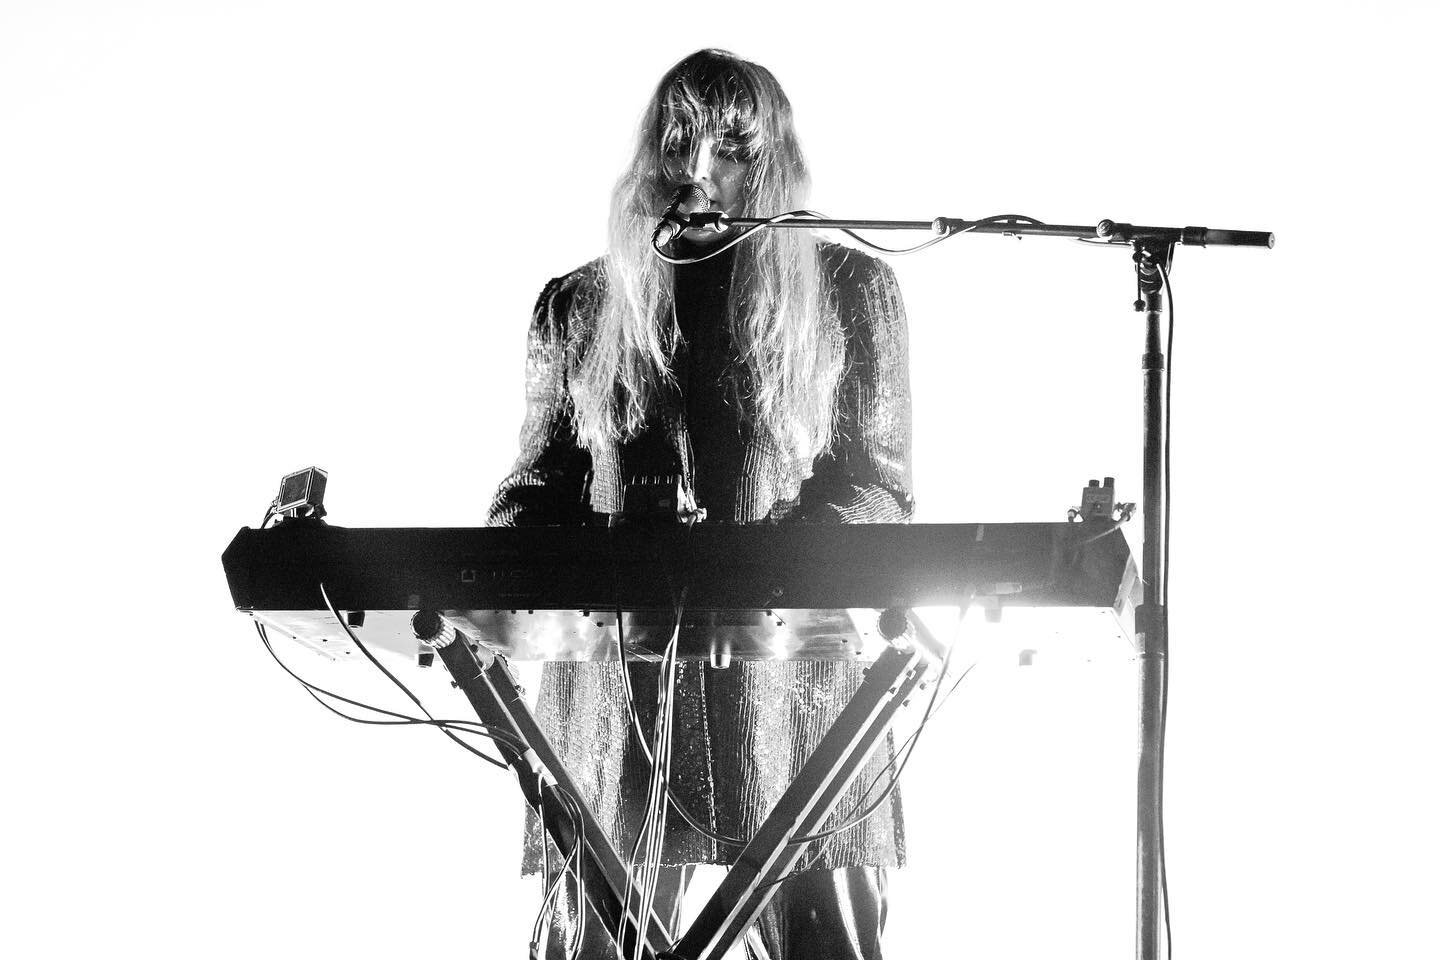 @beaccchhoussse released a new ep quite recently and it reminded me of that one time at @thetivolibrisbane when I was tasked to capture one of the trickiest gigs ever - nothing but constant strobe lighting and the occasional white out. A fleeting mom